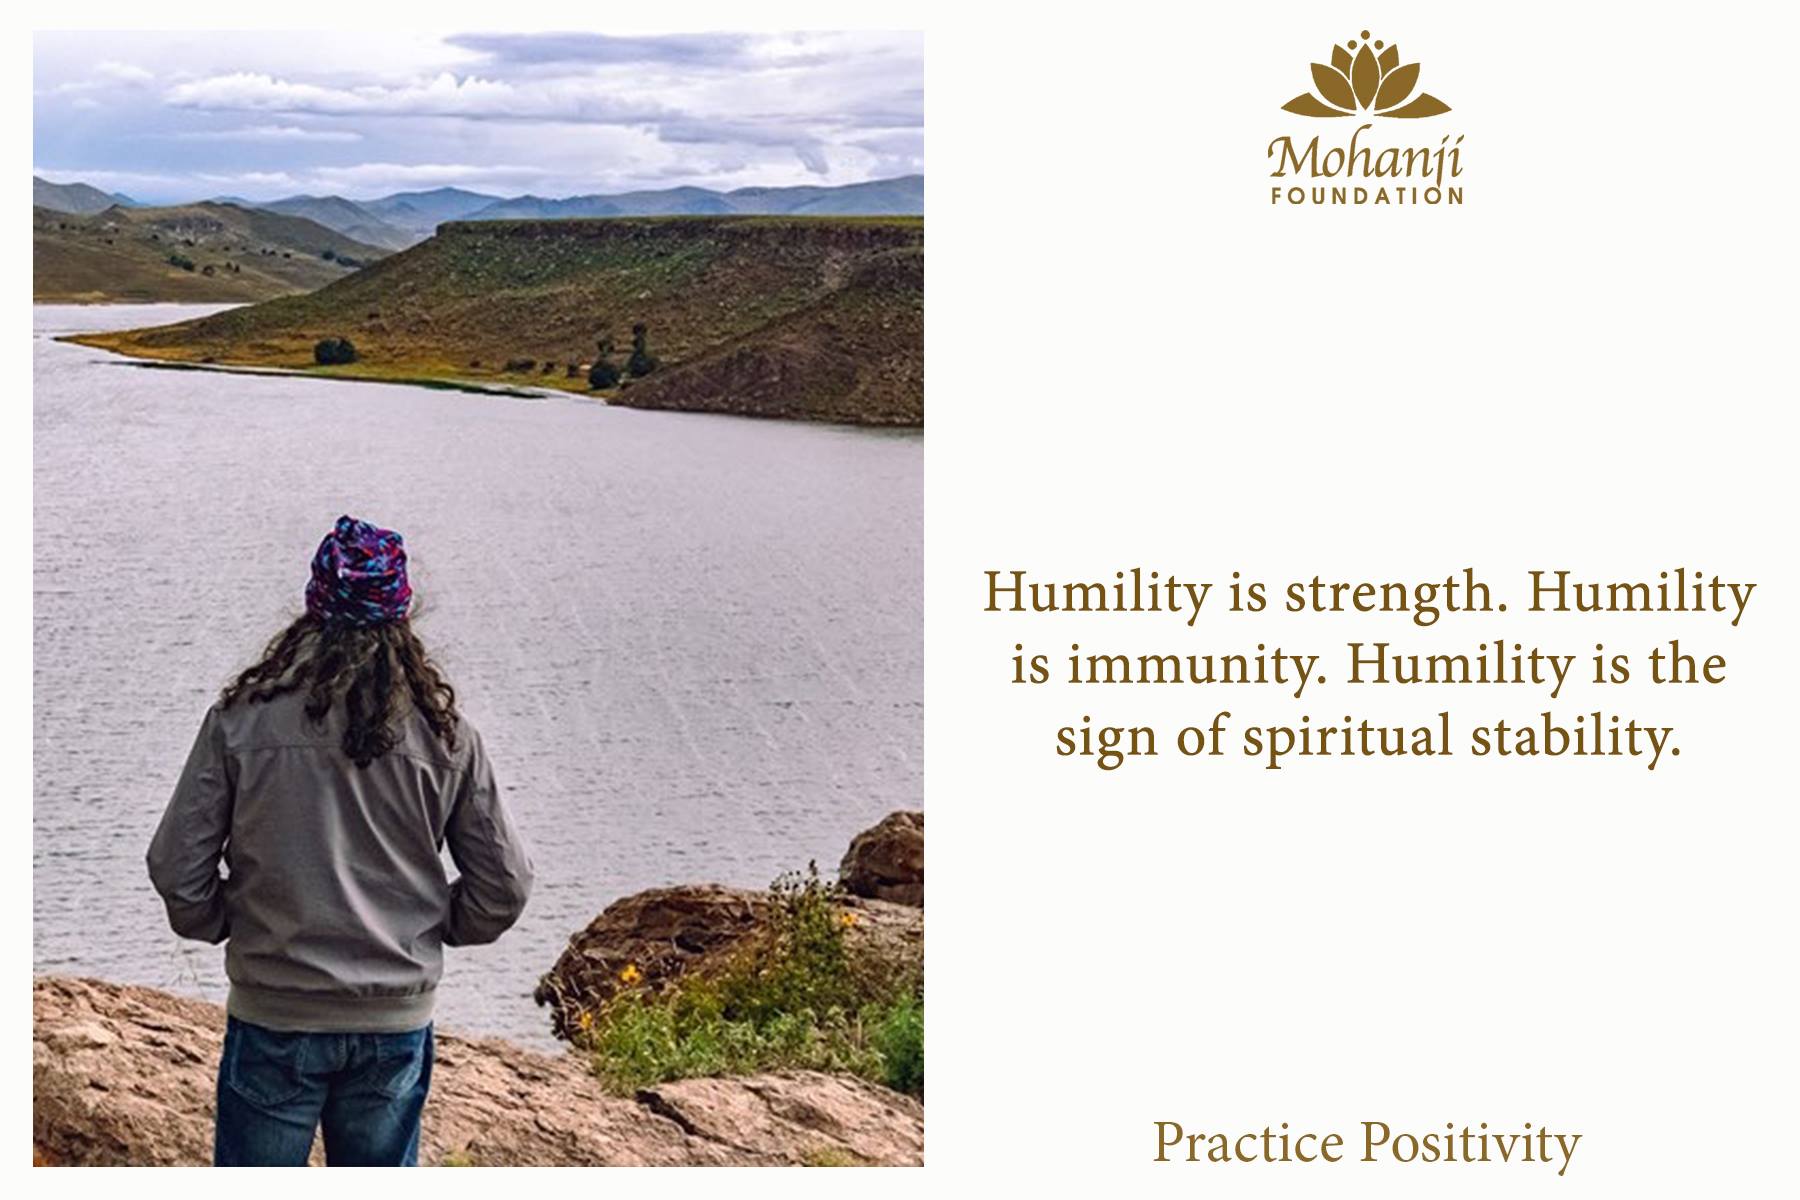 Humility is strength. Humility is immunity. Humility is the sign of spiritual stability.